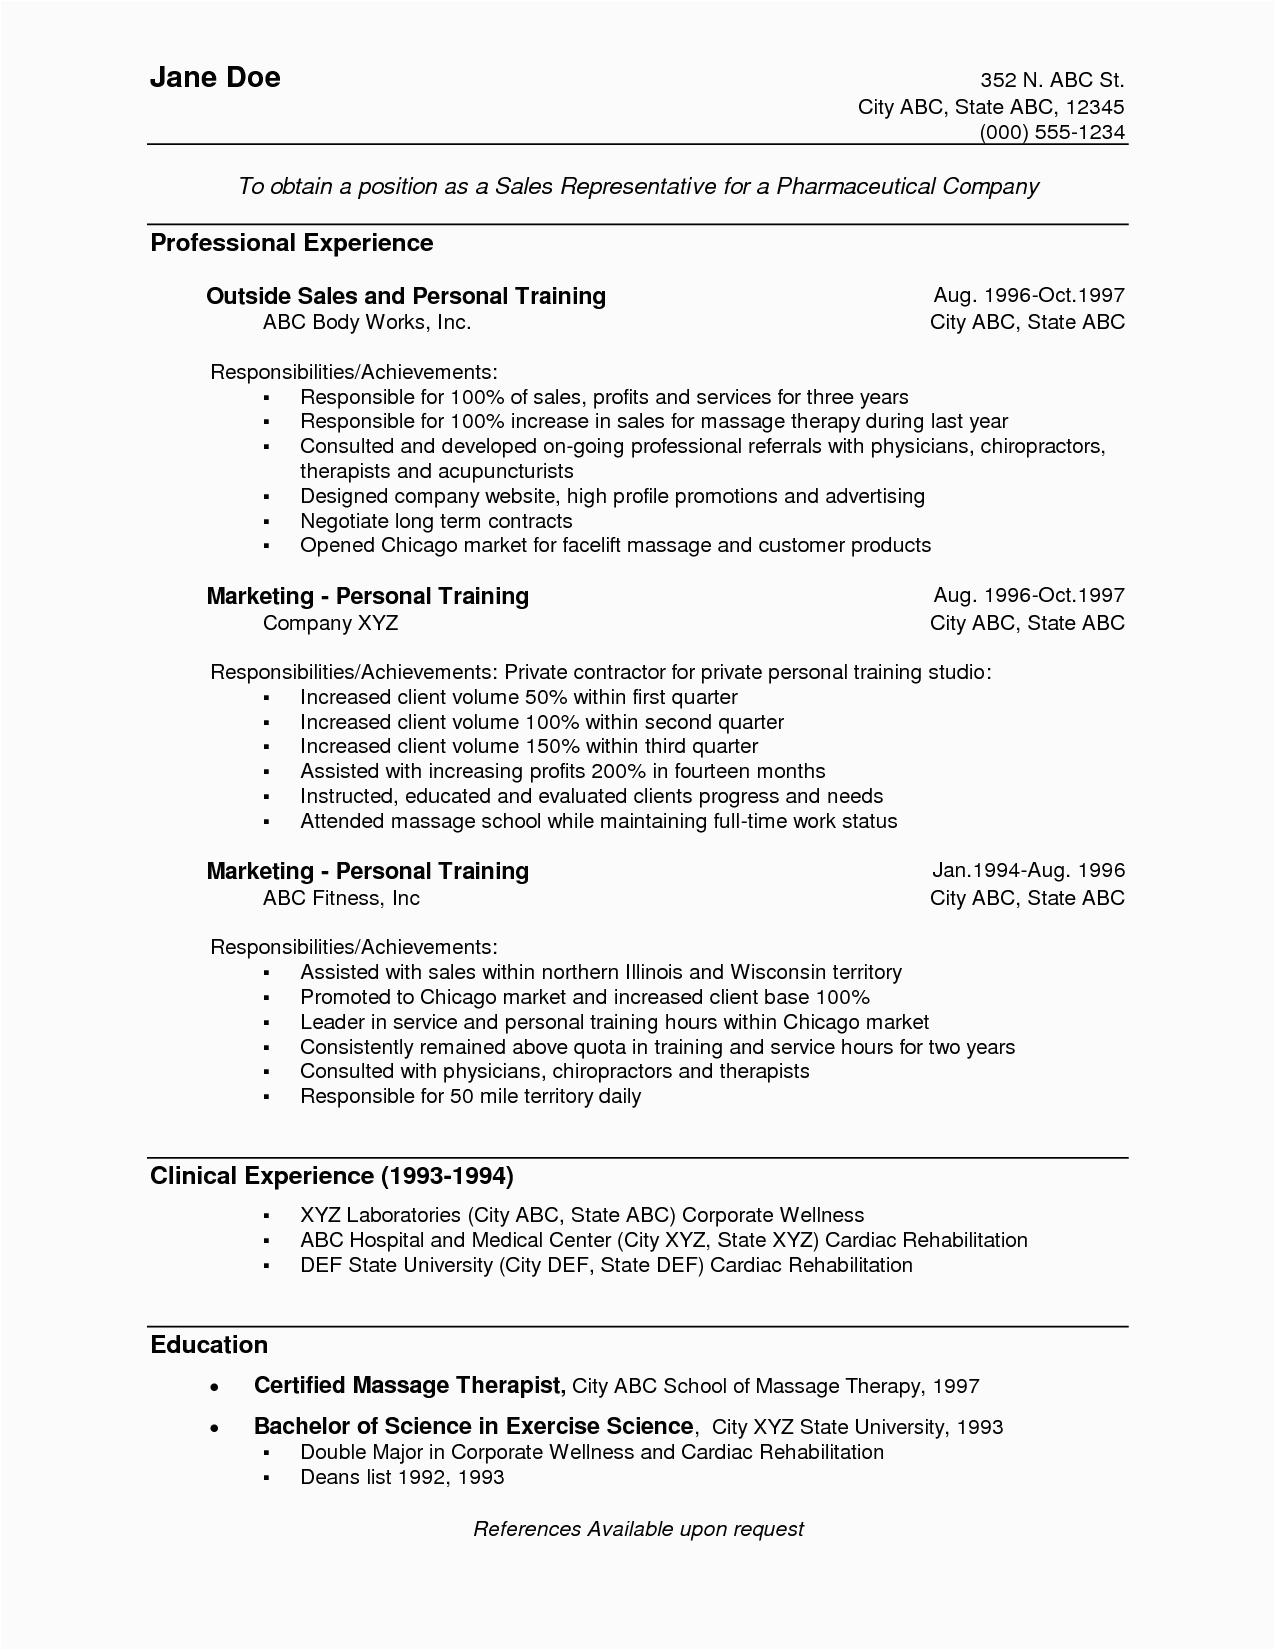 Sample Resume for Sales Representative with No Experience 14 15 Retail Resume Examples No Experience